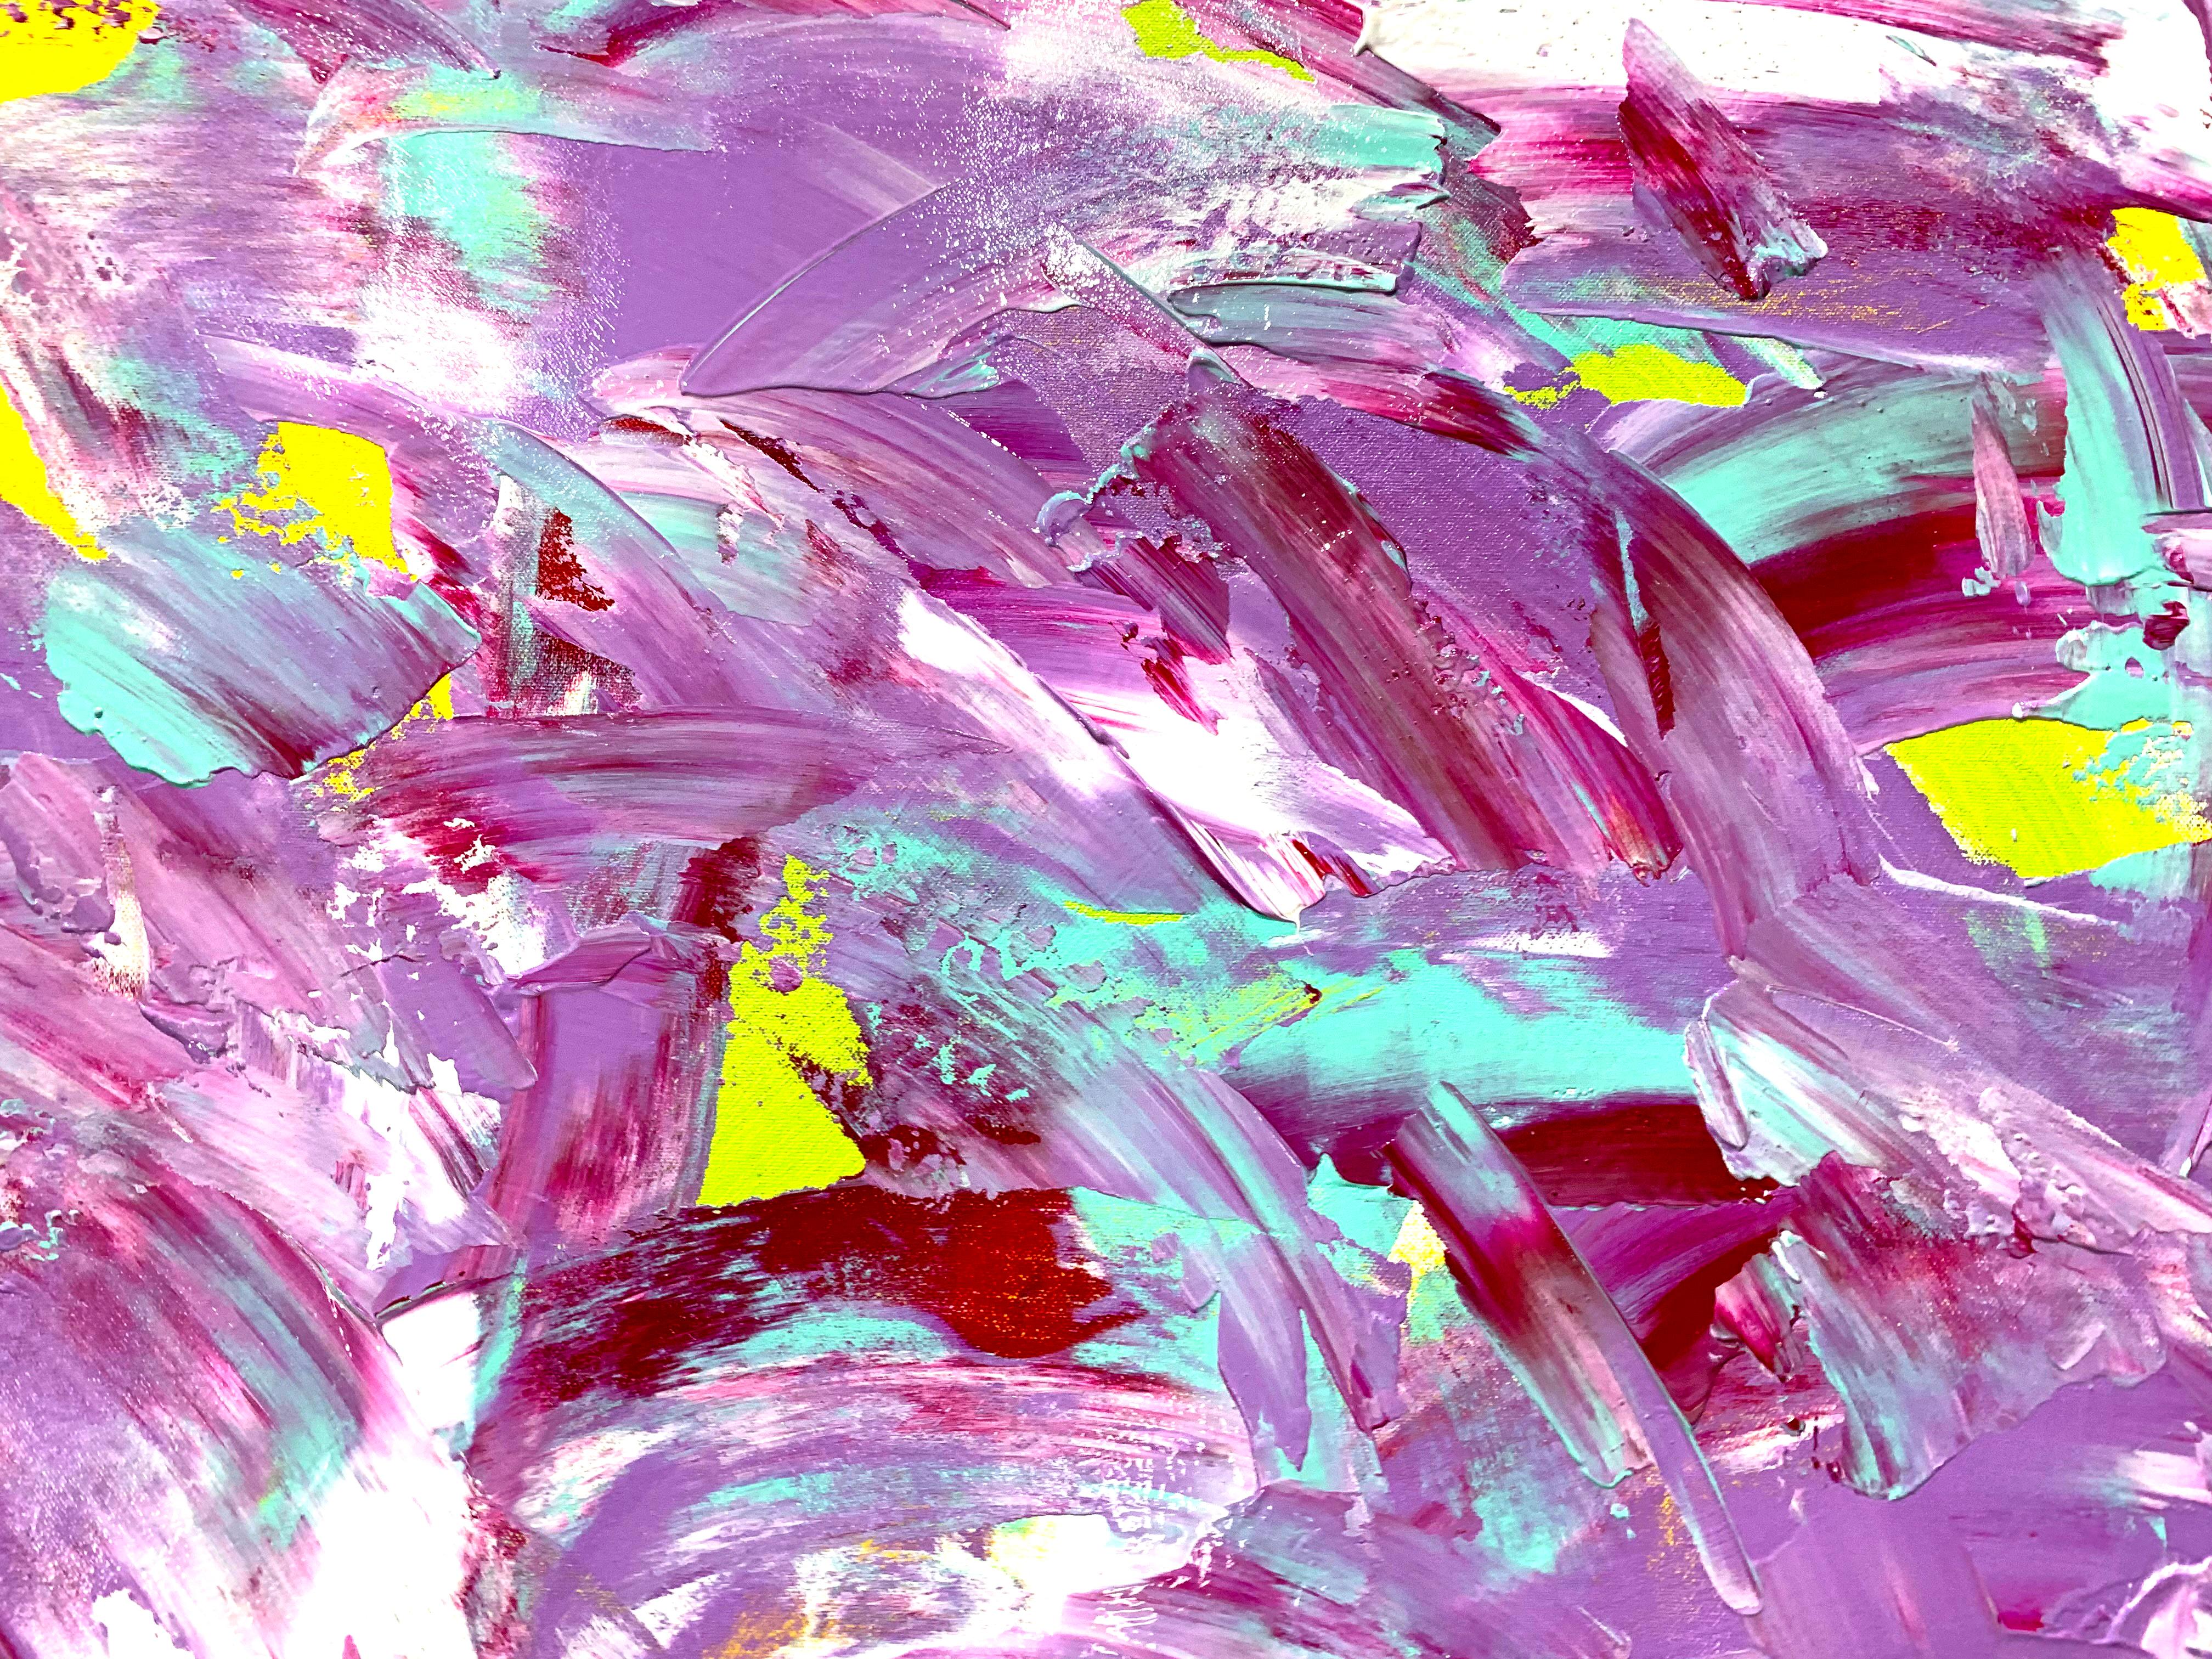 Lemon Tree Pathway - Purple Abstract Painting by Estelle Asmodelle